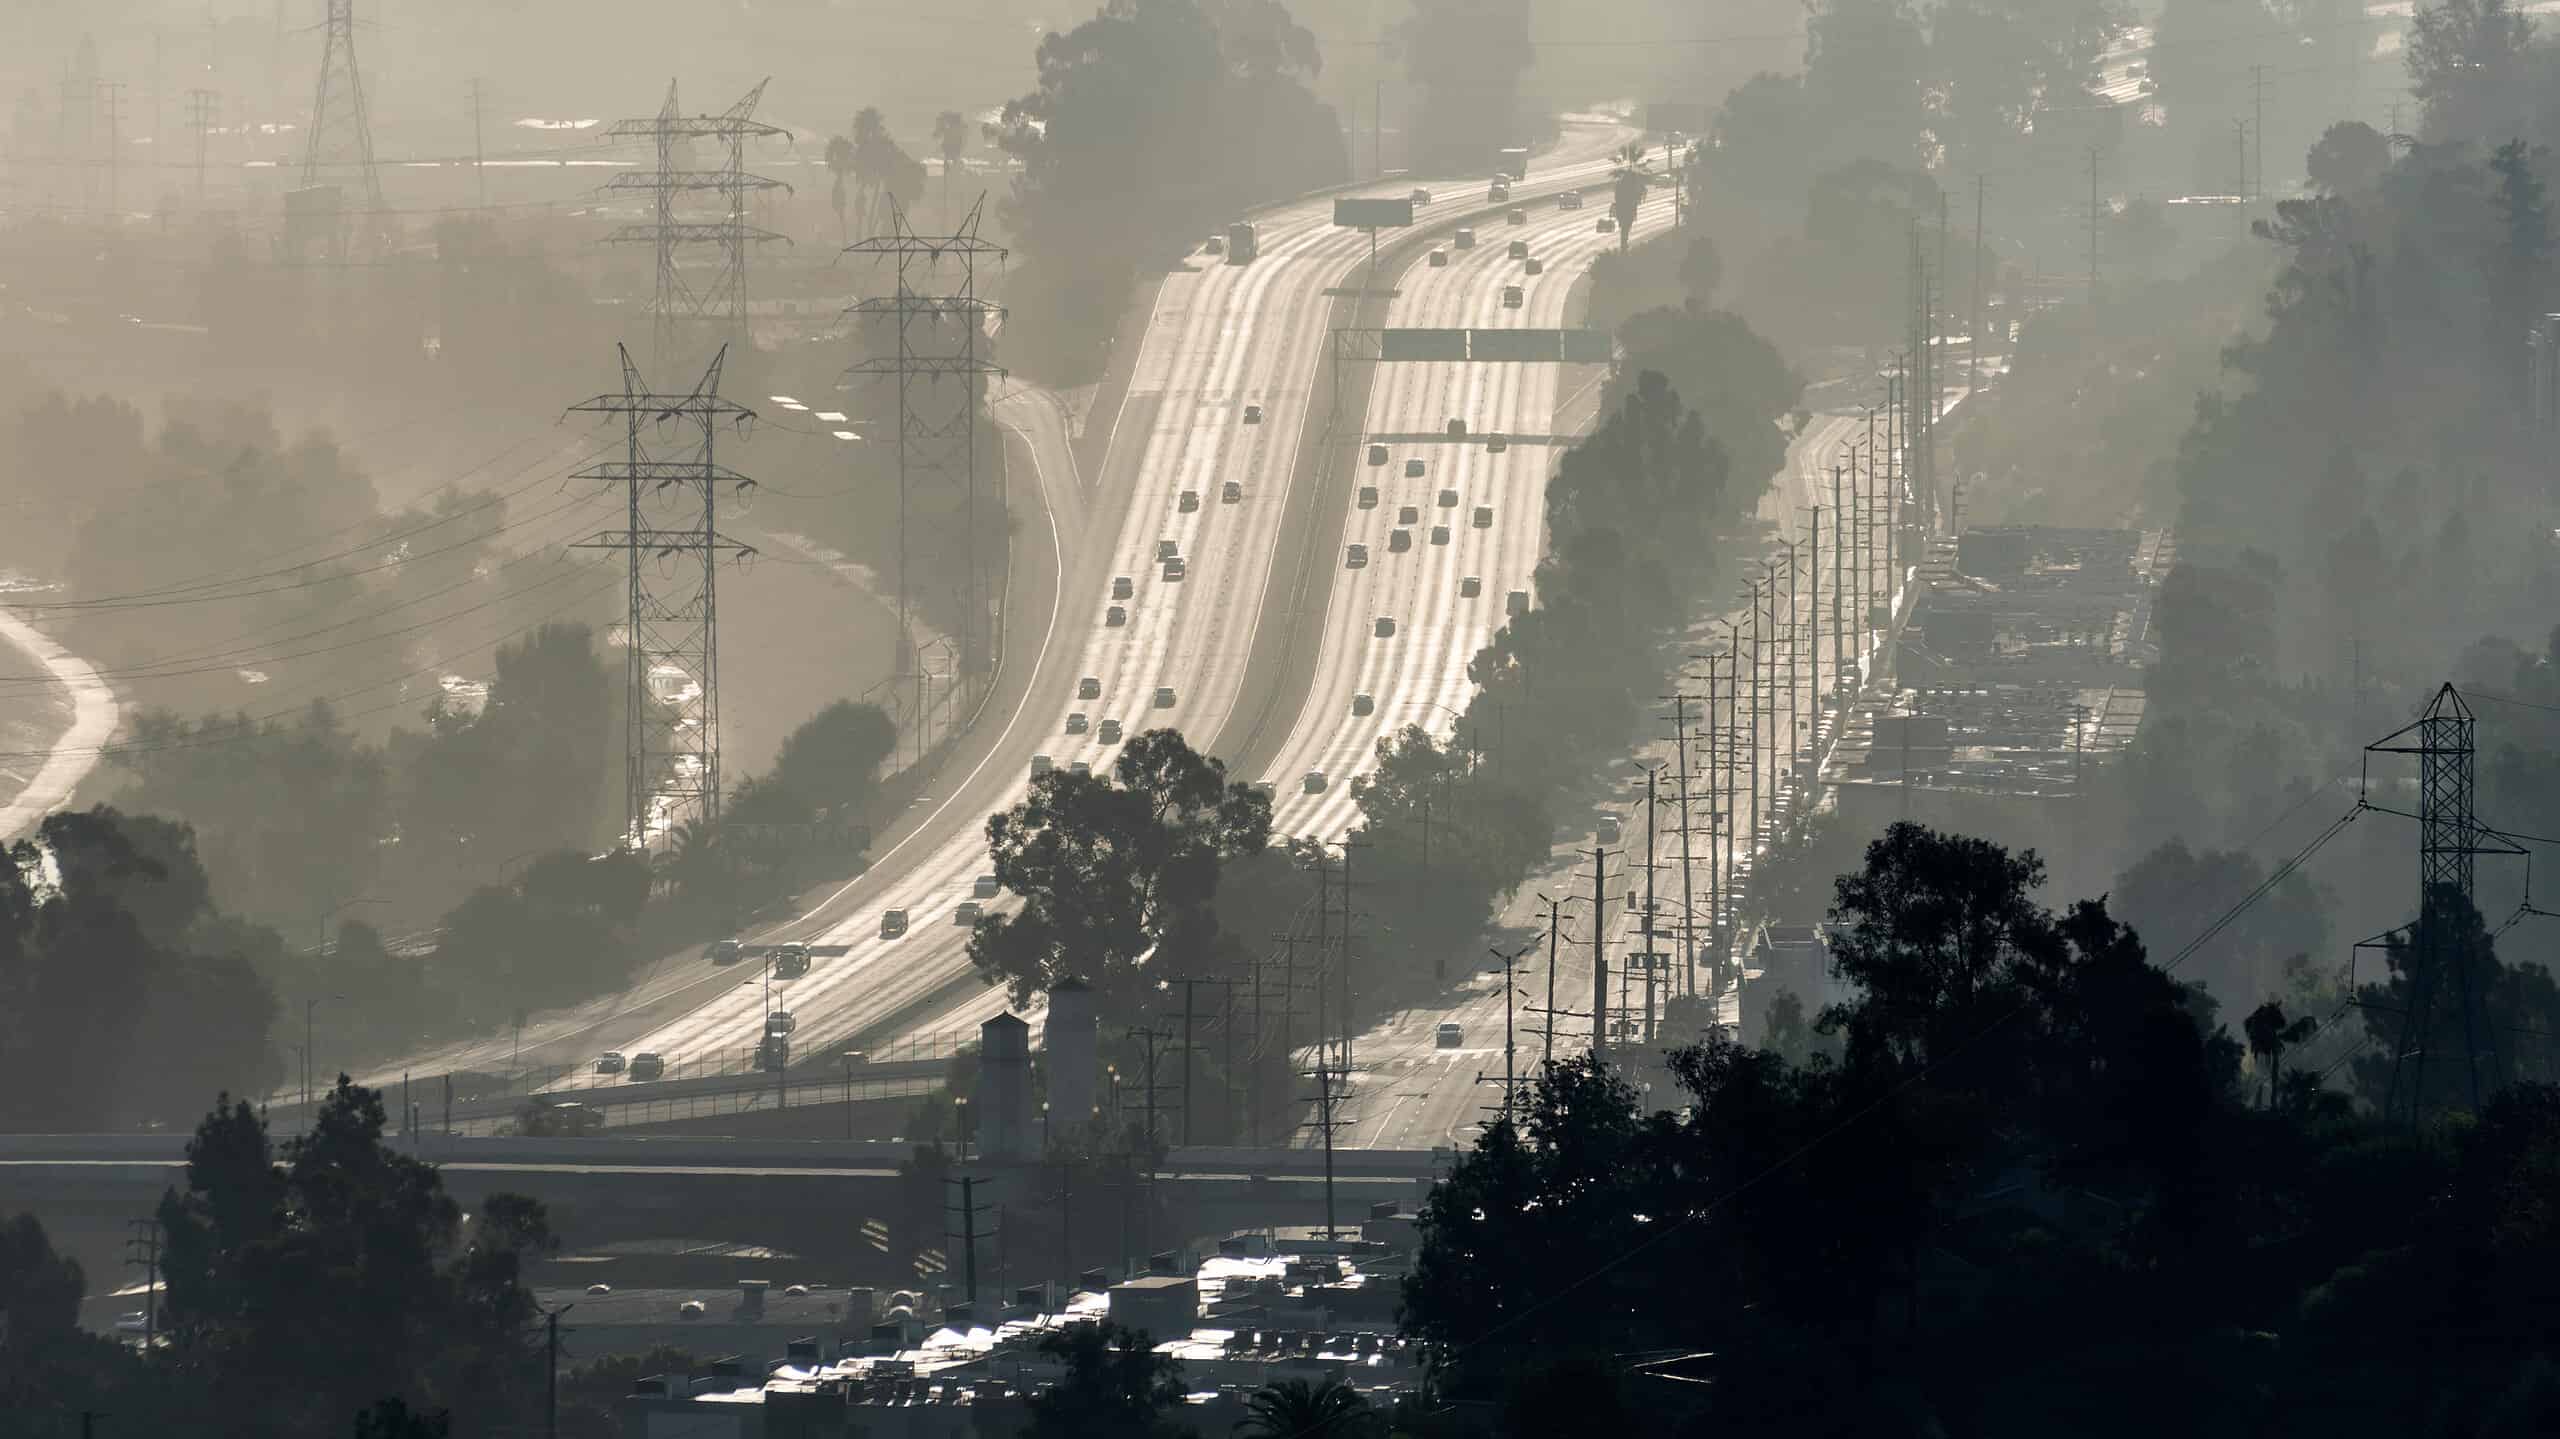 Hazy smoggy view of the 5 freeway near Riverside Drive, Griffith Park and the Los Angeles River in Southern California.